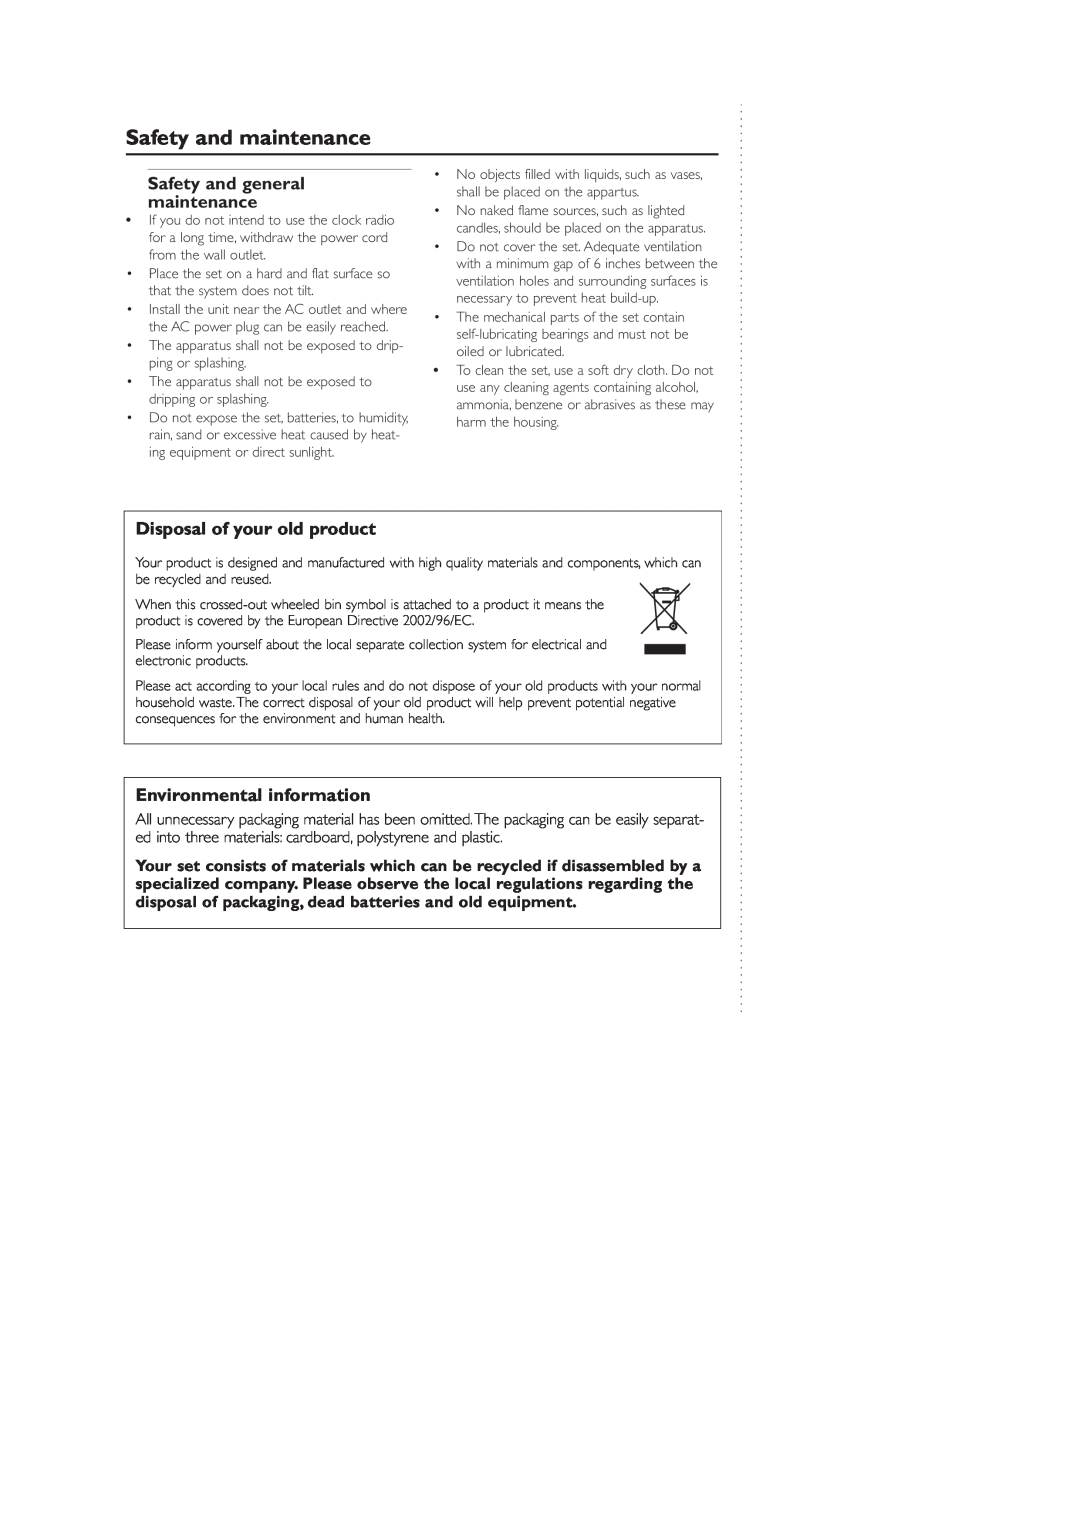 Philips AJ260 user manual Safety and maintenance, Disposal of your old product, Environmental information 